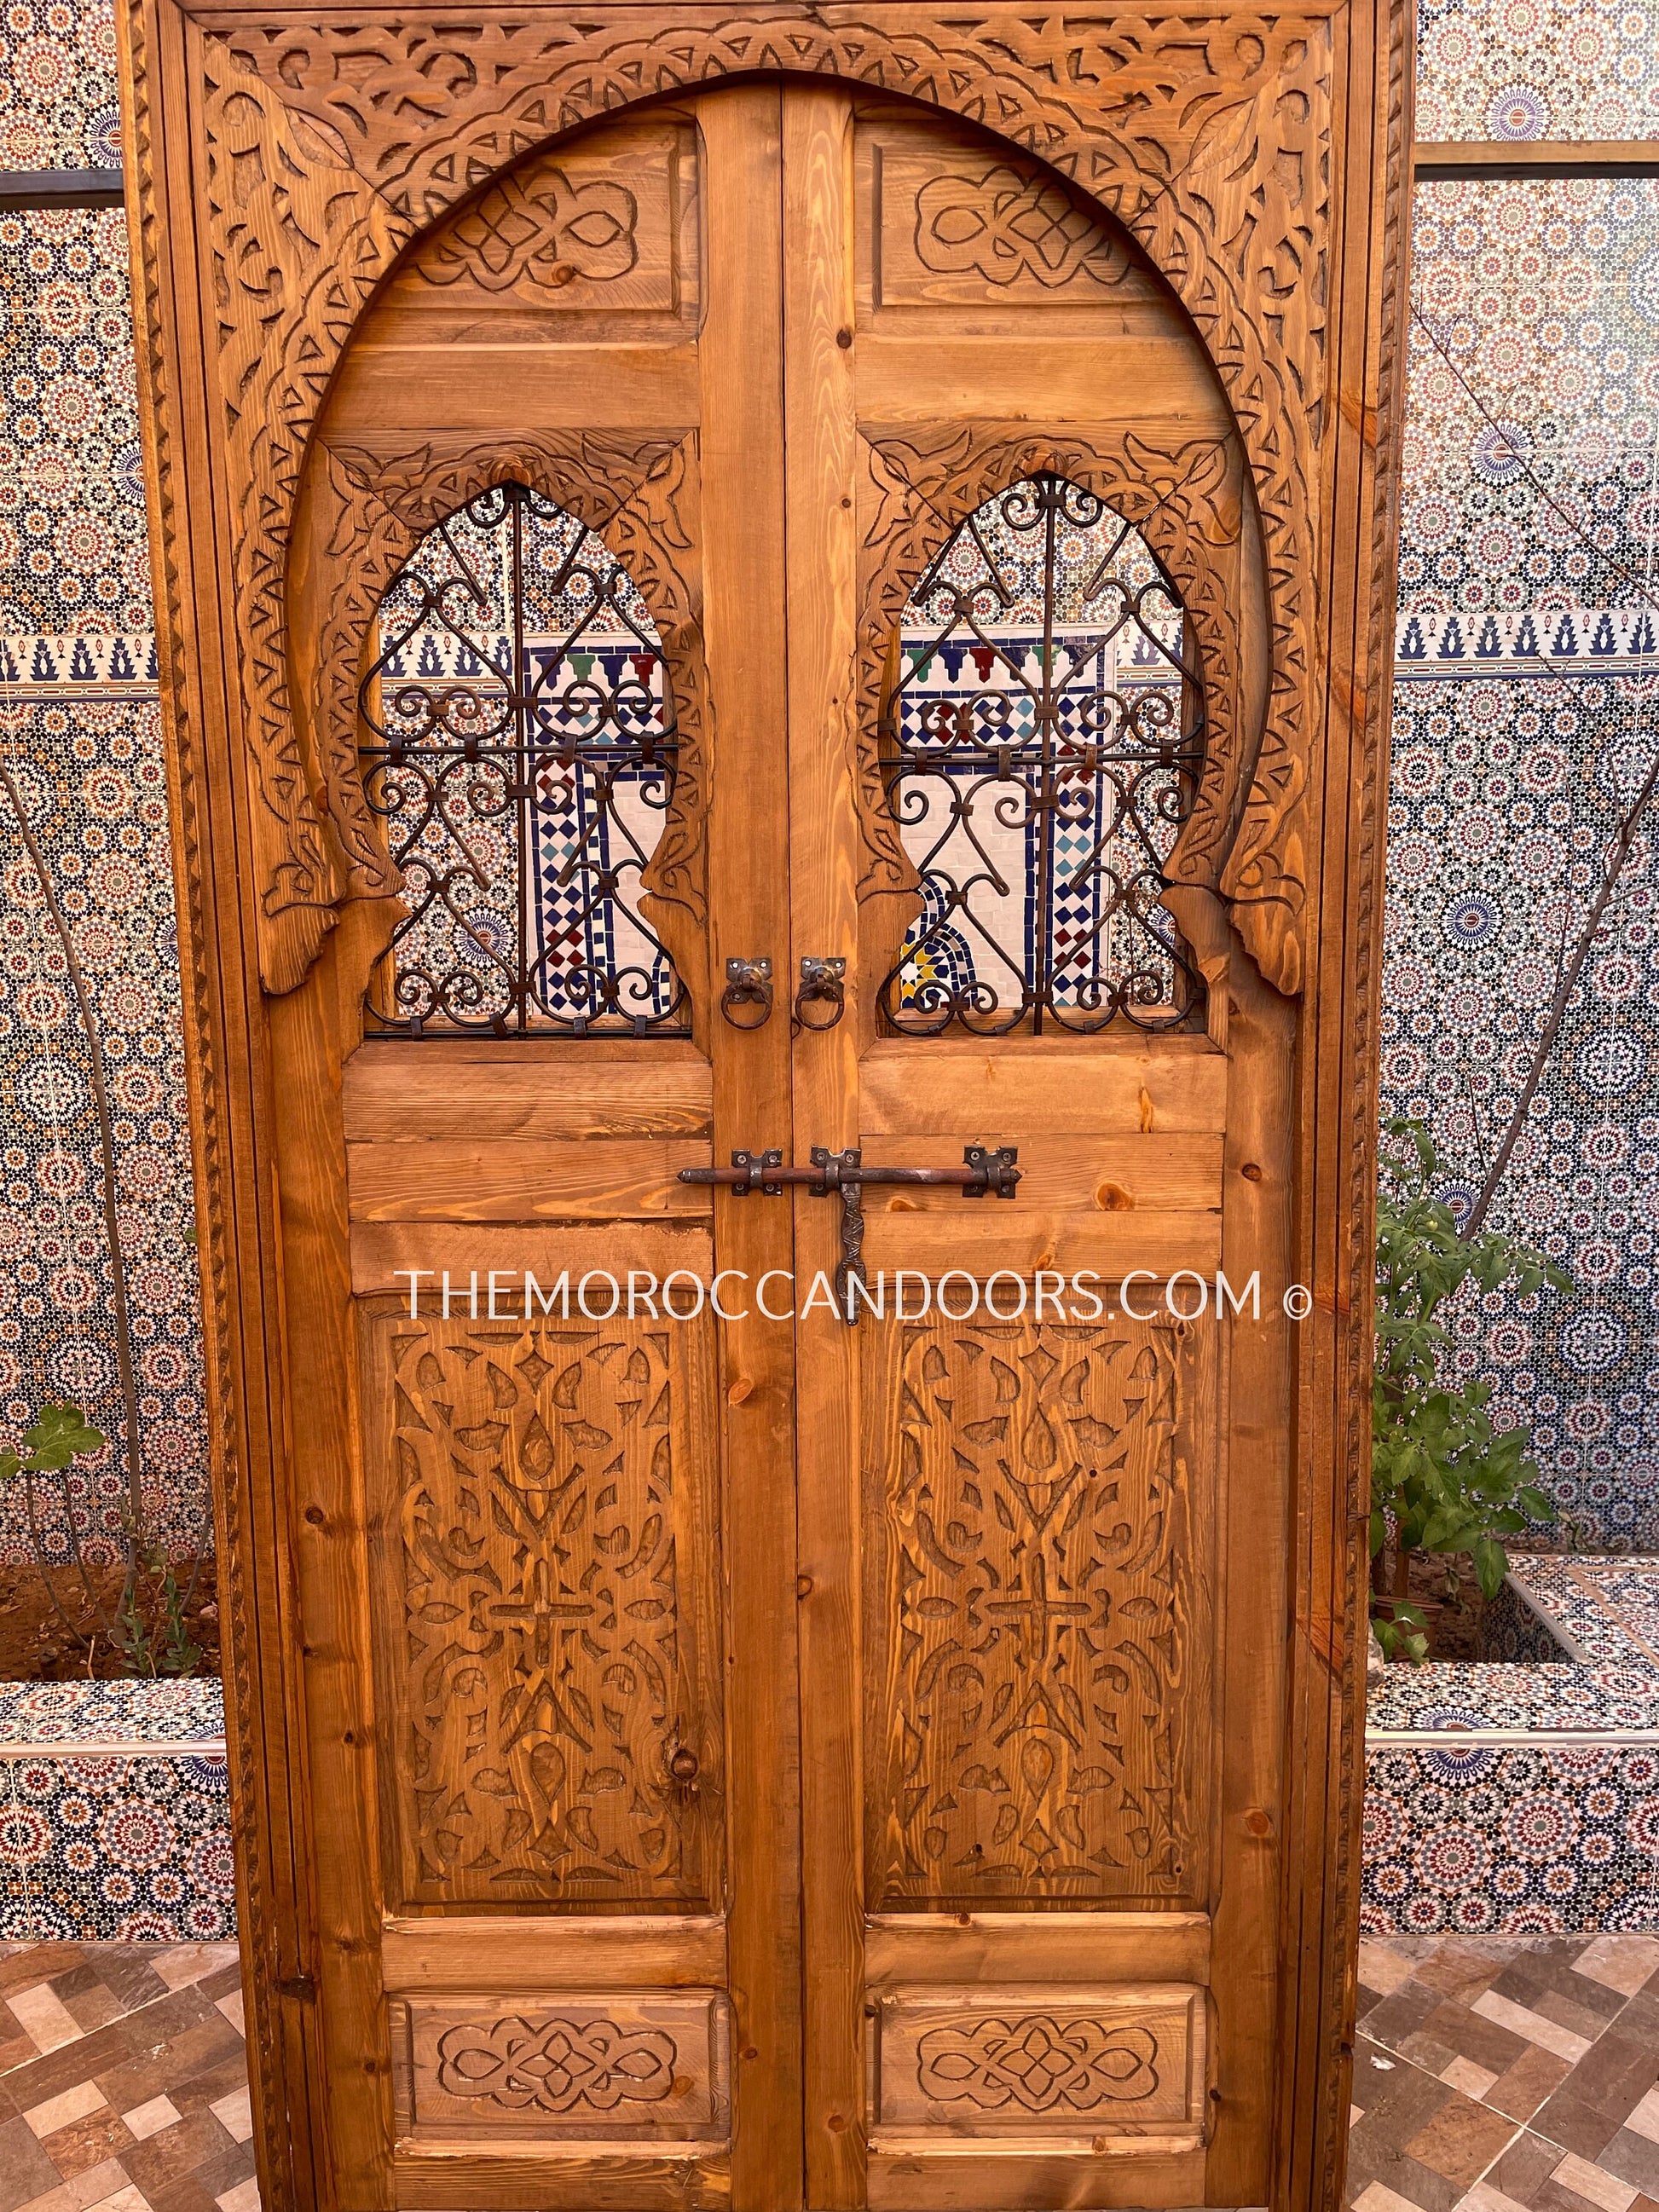 Hand Carved Wood Door with Wrought Iron Windows - A Timeless Legacy for Your Home